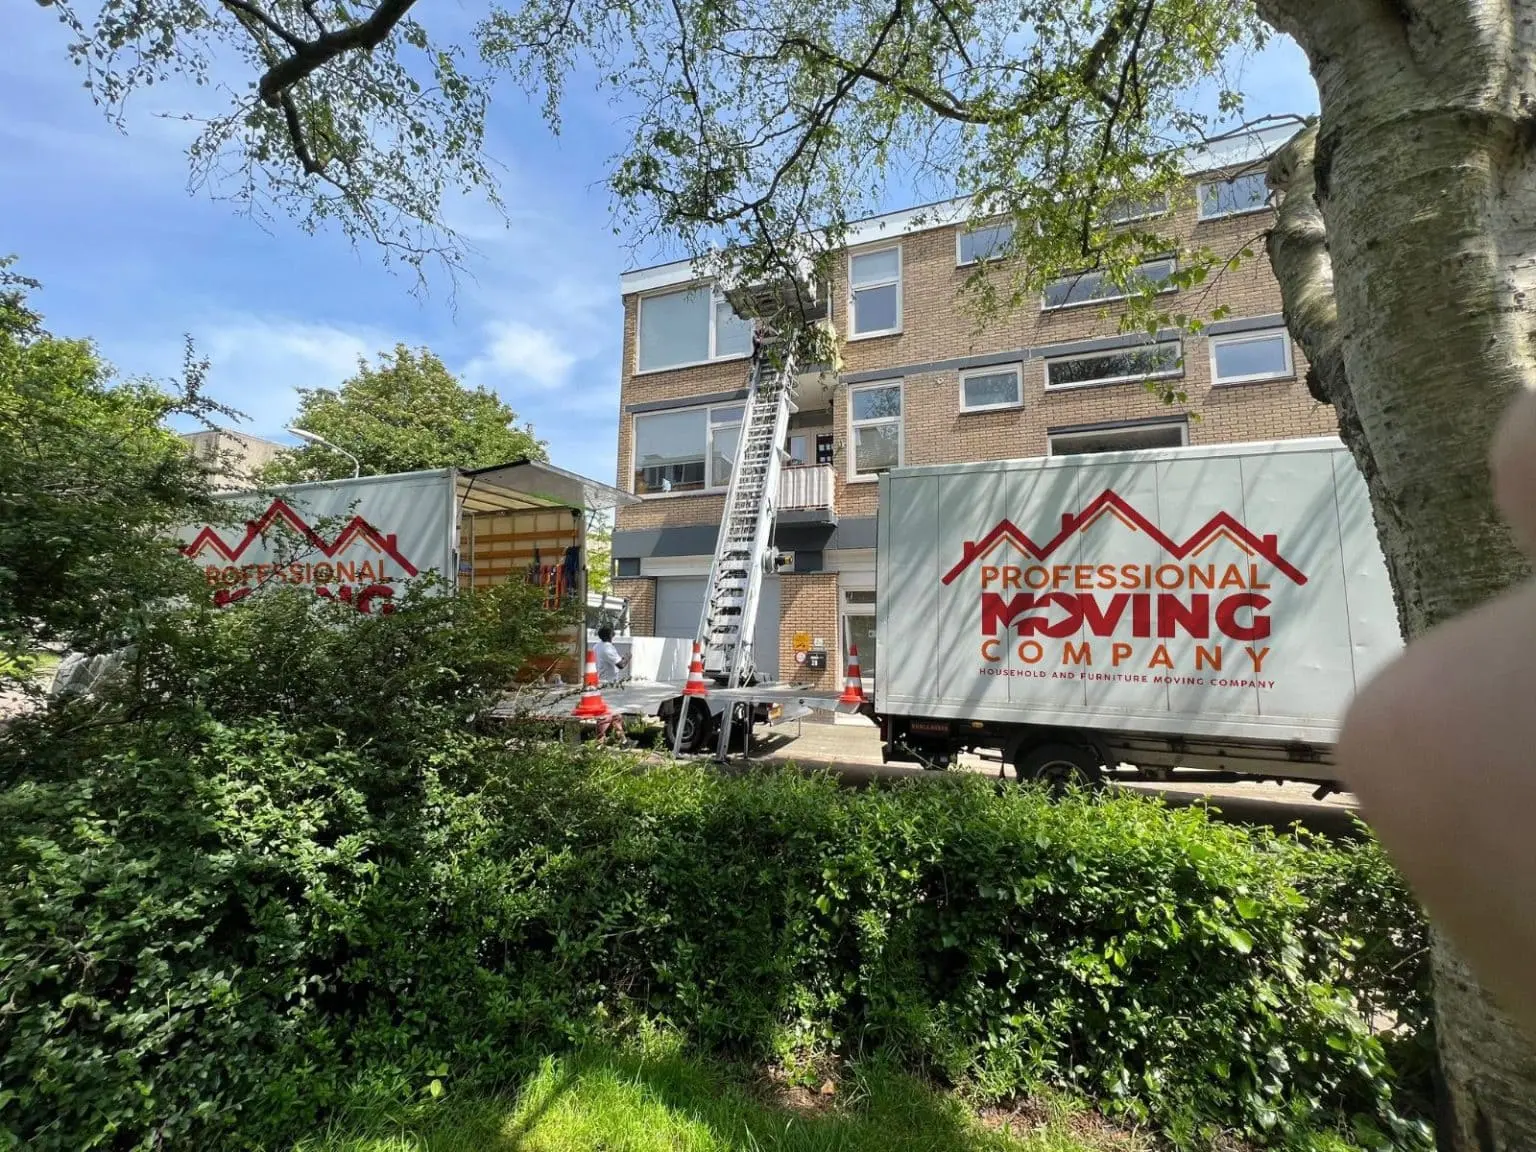 Moving Company Voorschoten Professional Moving Company 2